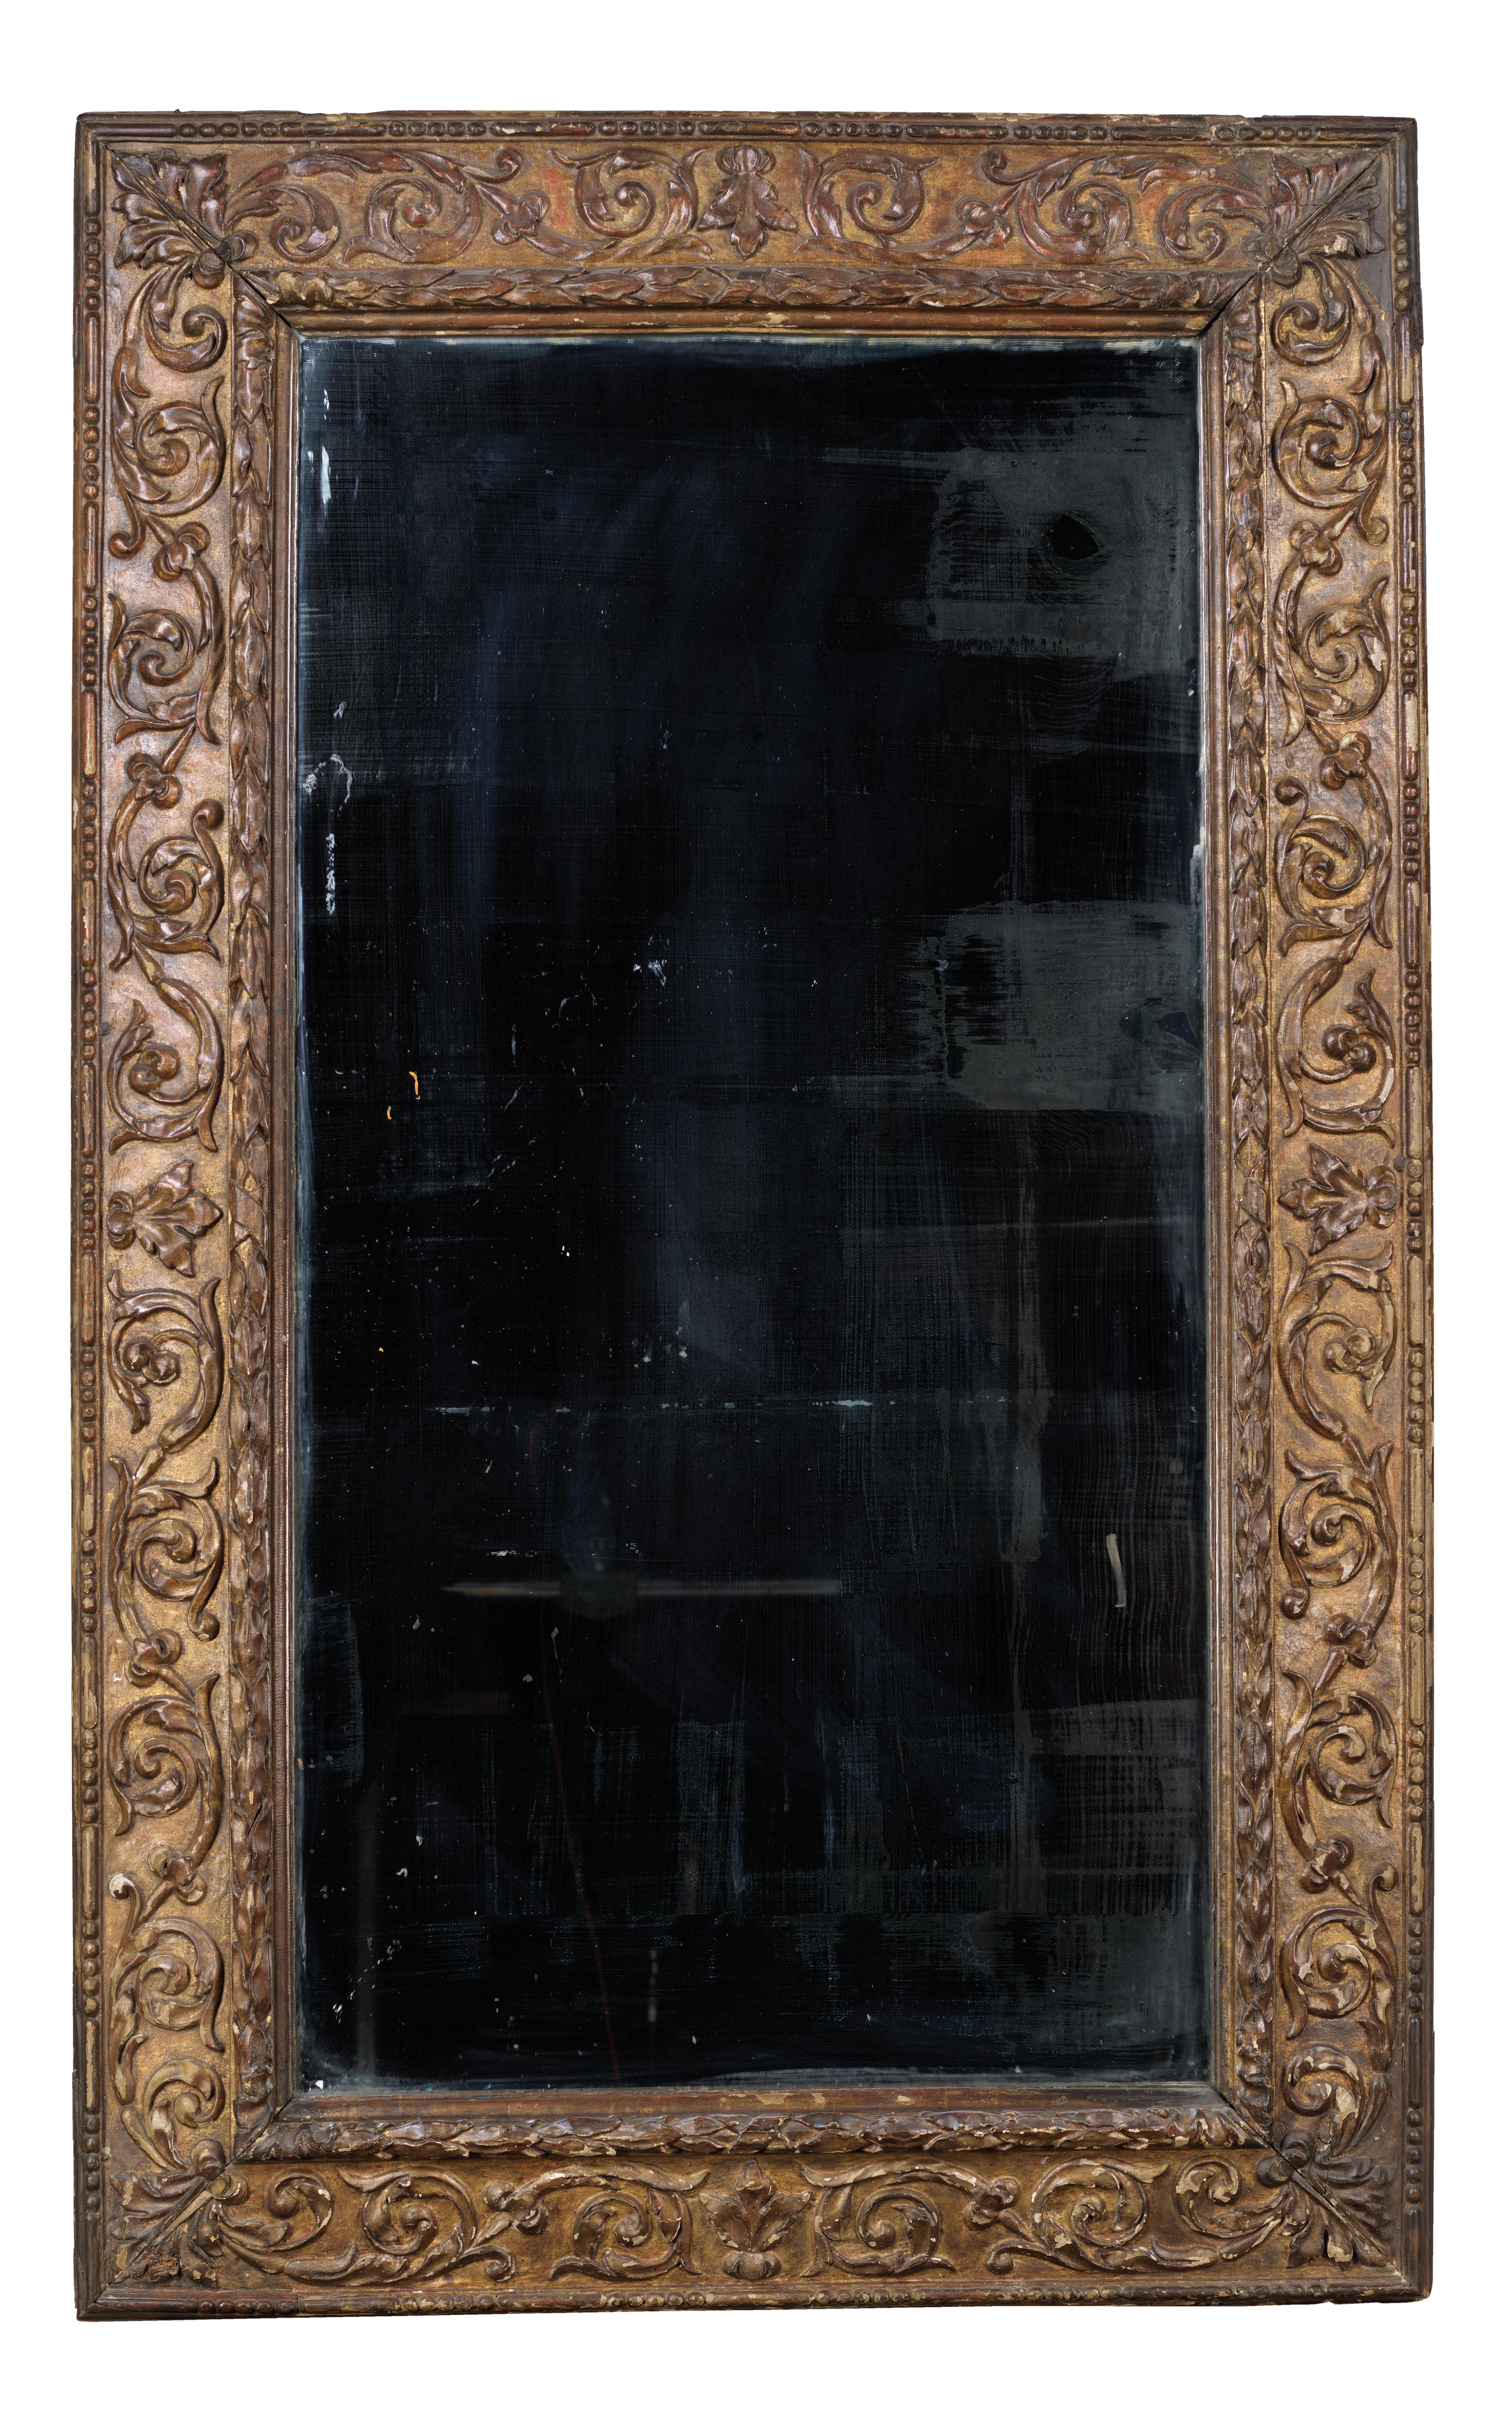 Large Italian mirror with a carved gilded wood frame. A roundel is covered by laurel leaves and folliage-scrolls on a smooth background. 
The outer edge is hemmed by alternating beads and billets moulding.